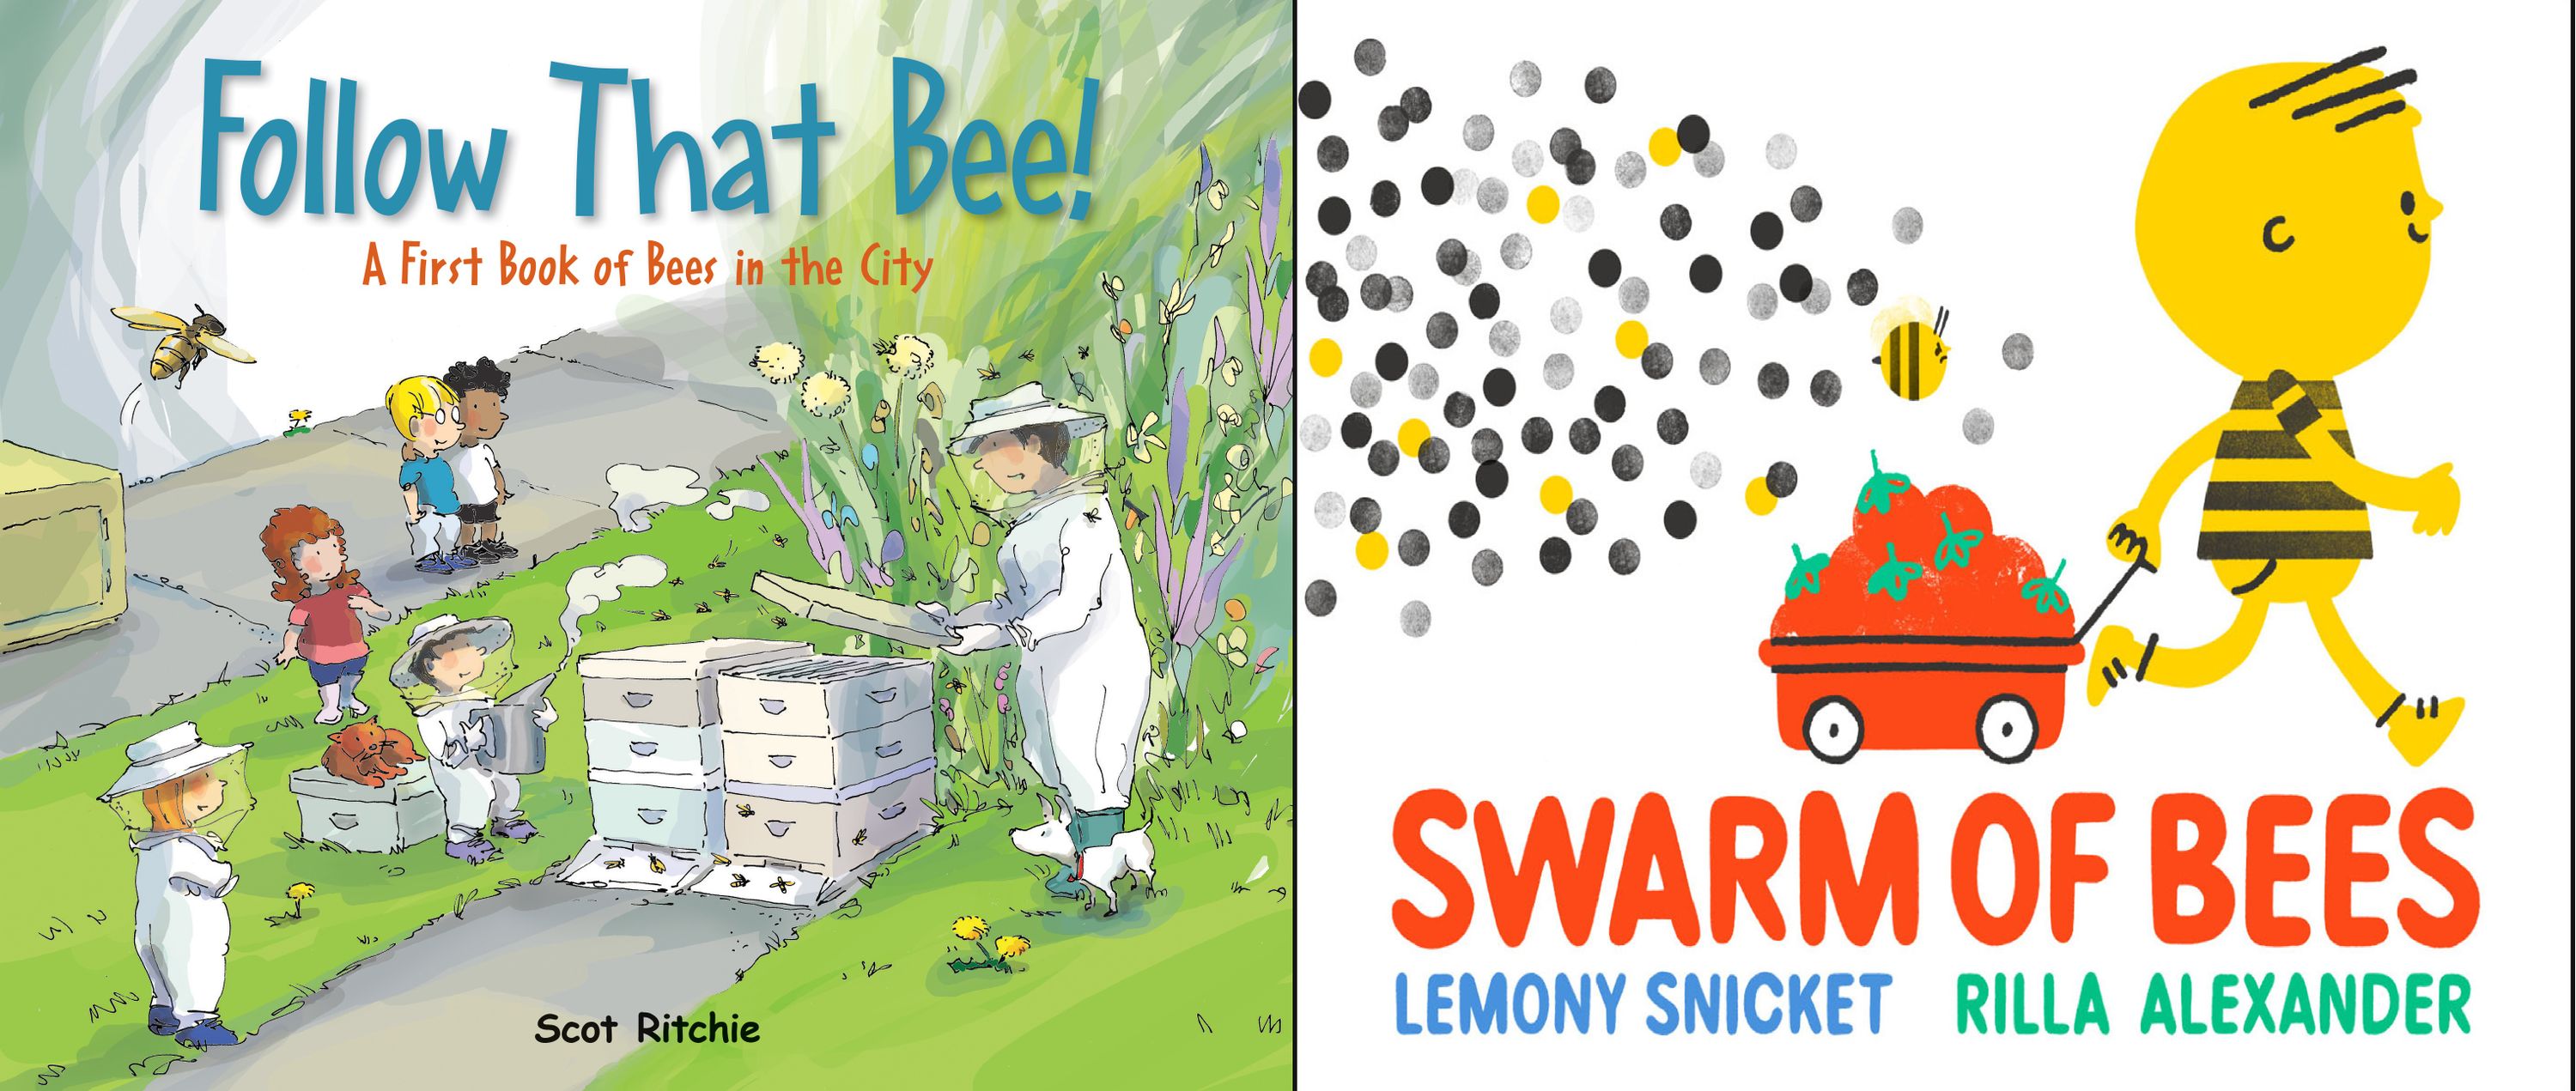 Books for Kids: Two offerings that explore the world of bees